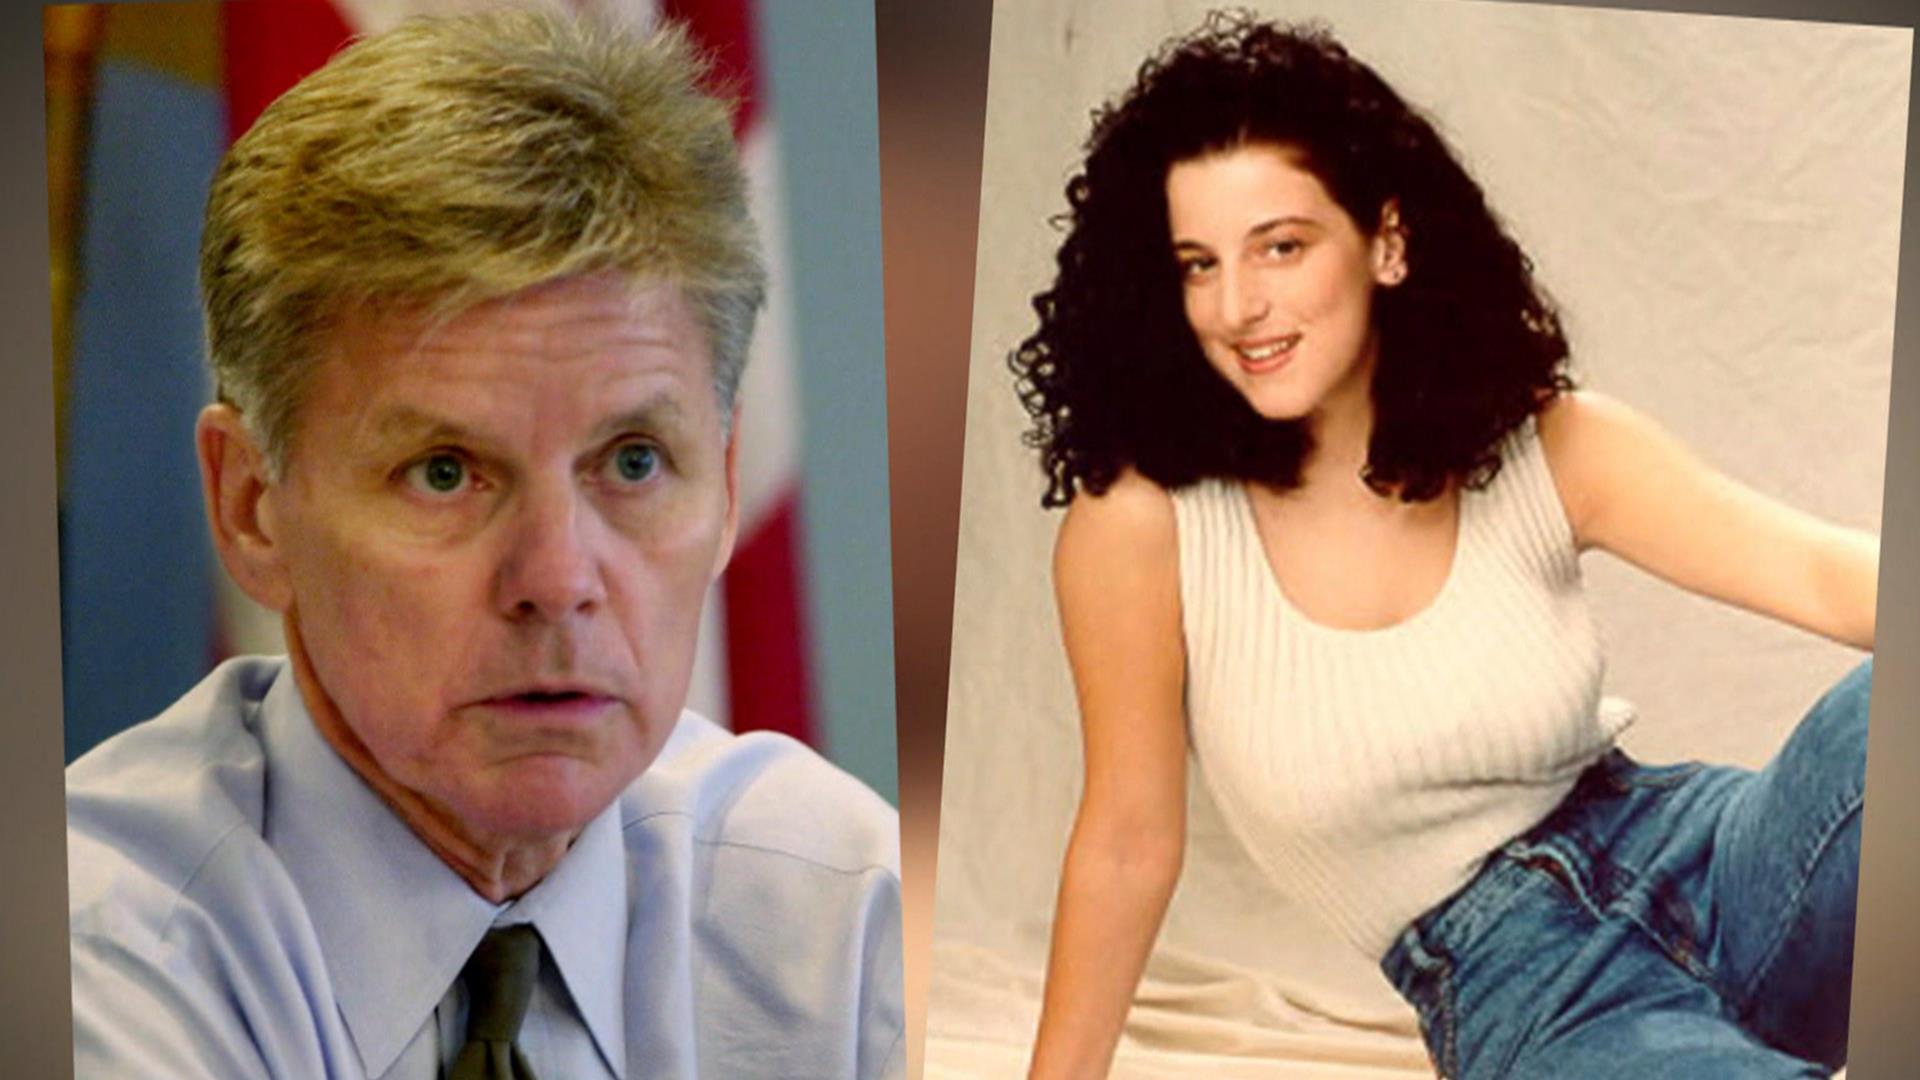 Chandra Levy's mom: My daughter and Gary Condit 'weren't just good friends'